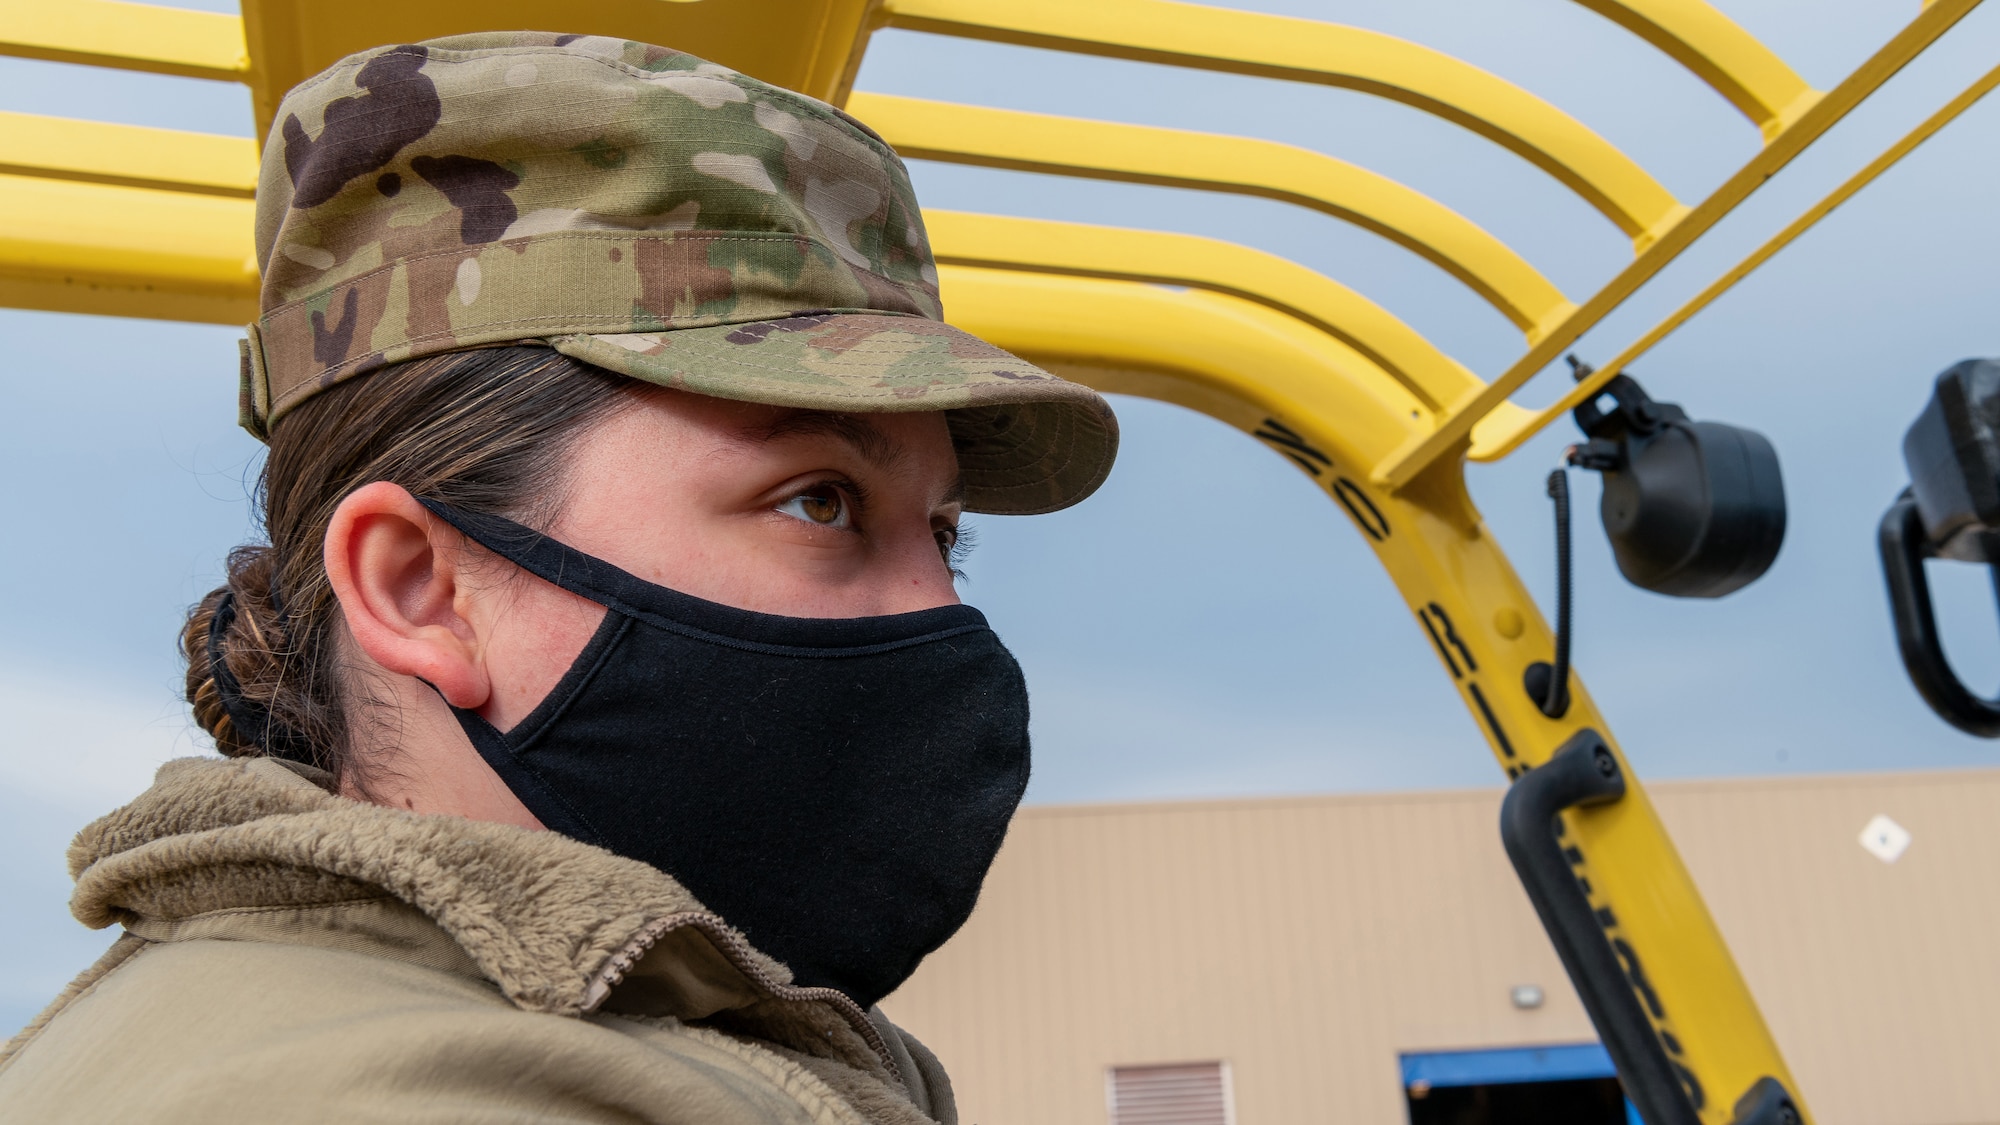 Airman driving forklift.